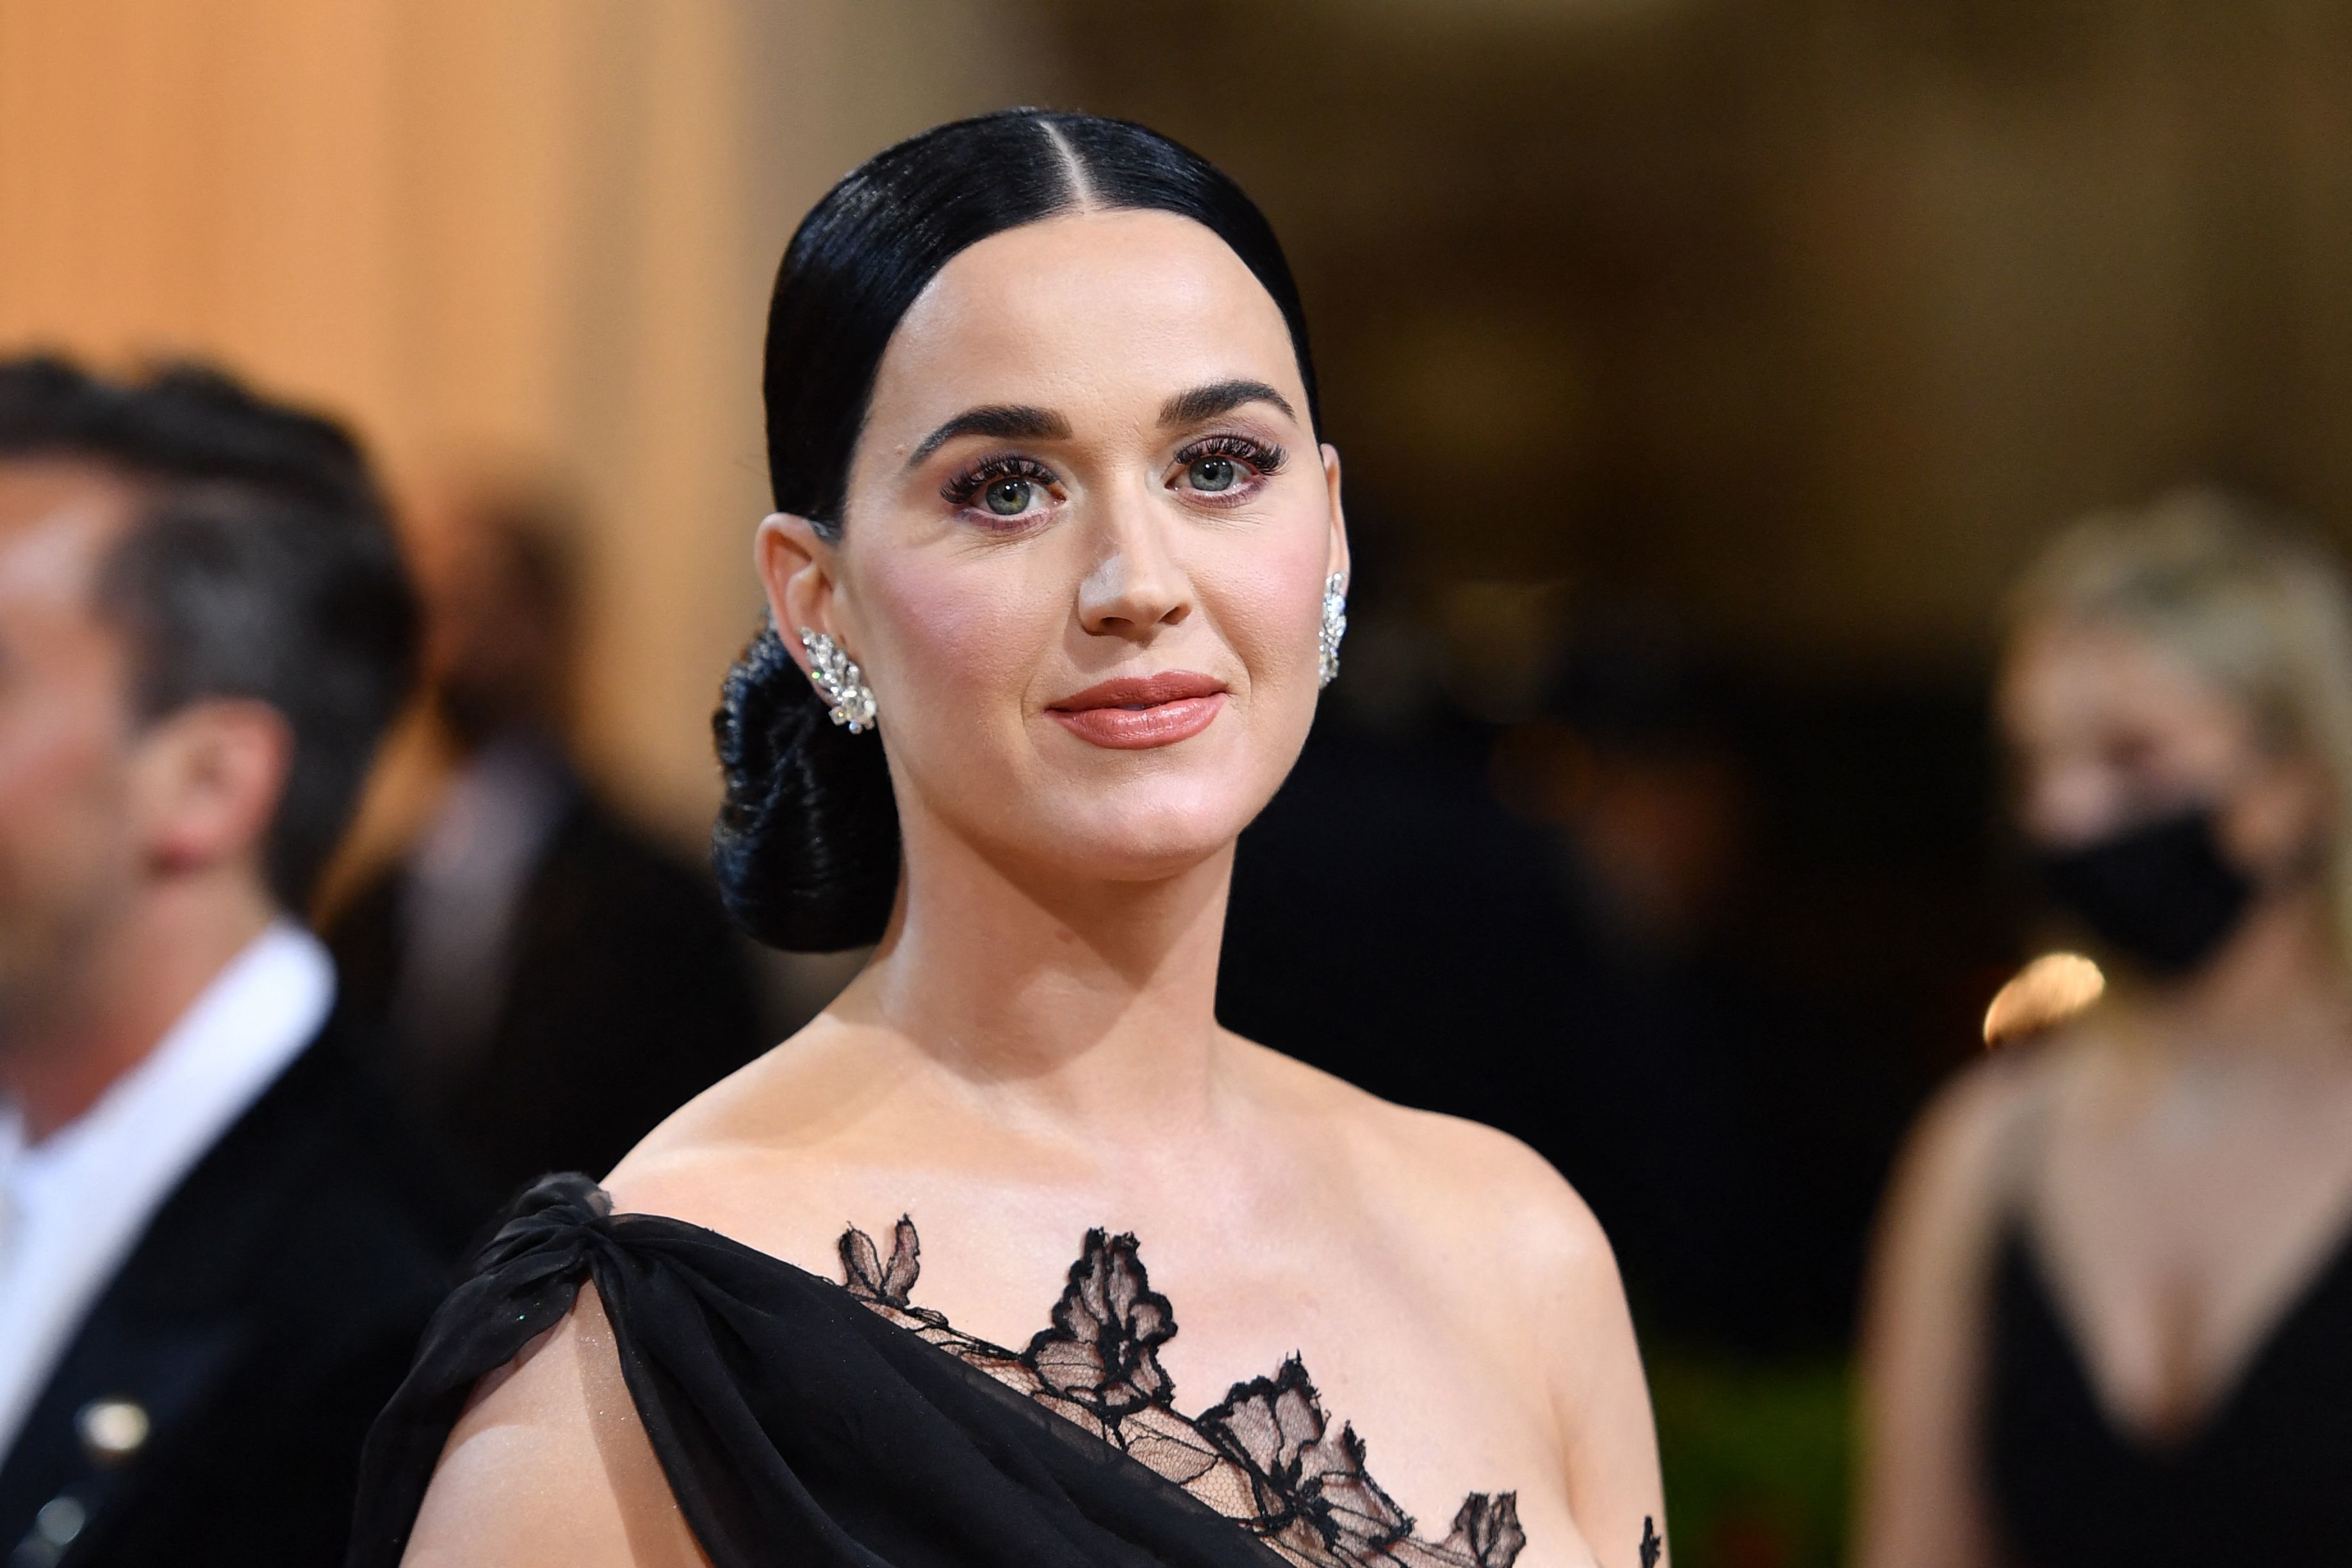 Katy Perry at an event, wearing an elegant off-shoulder gown with floral accents and statement earrings